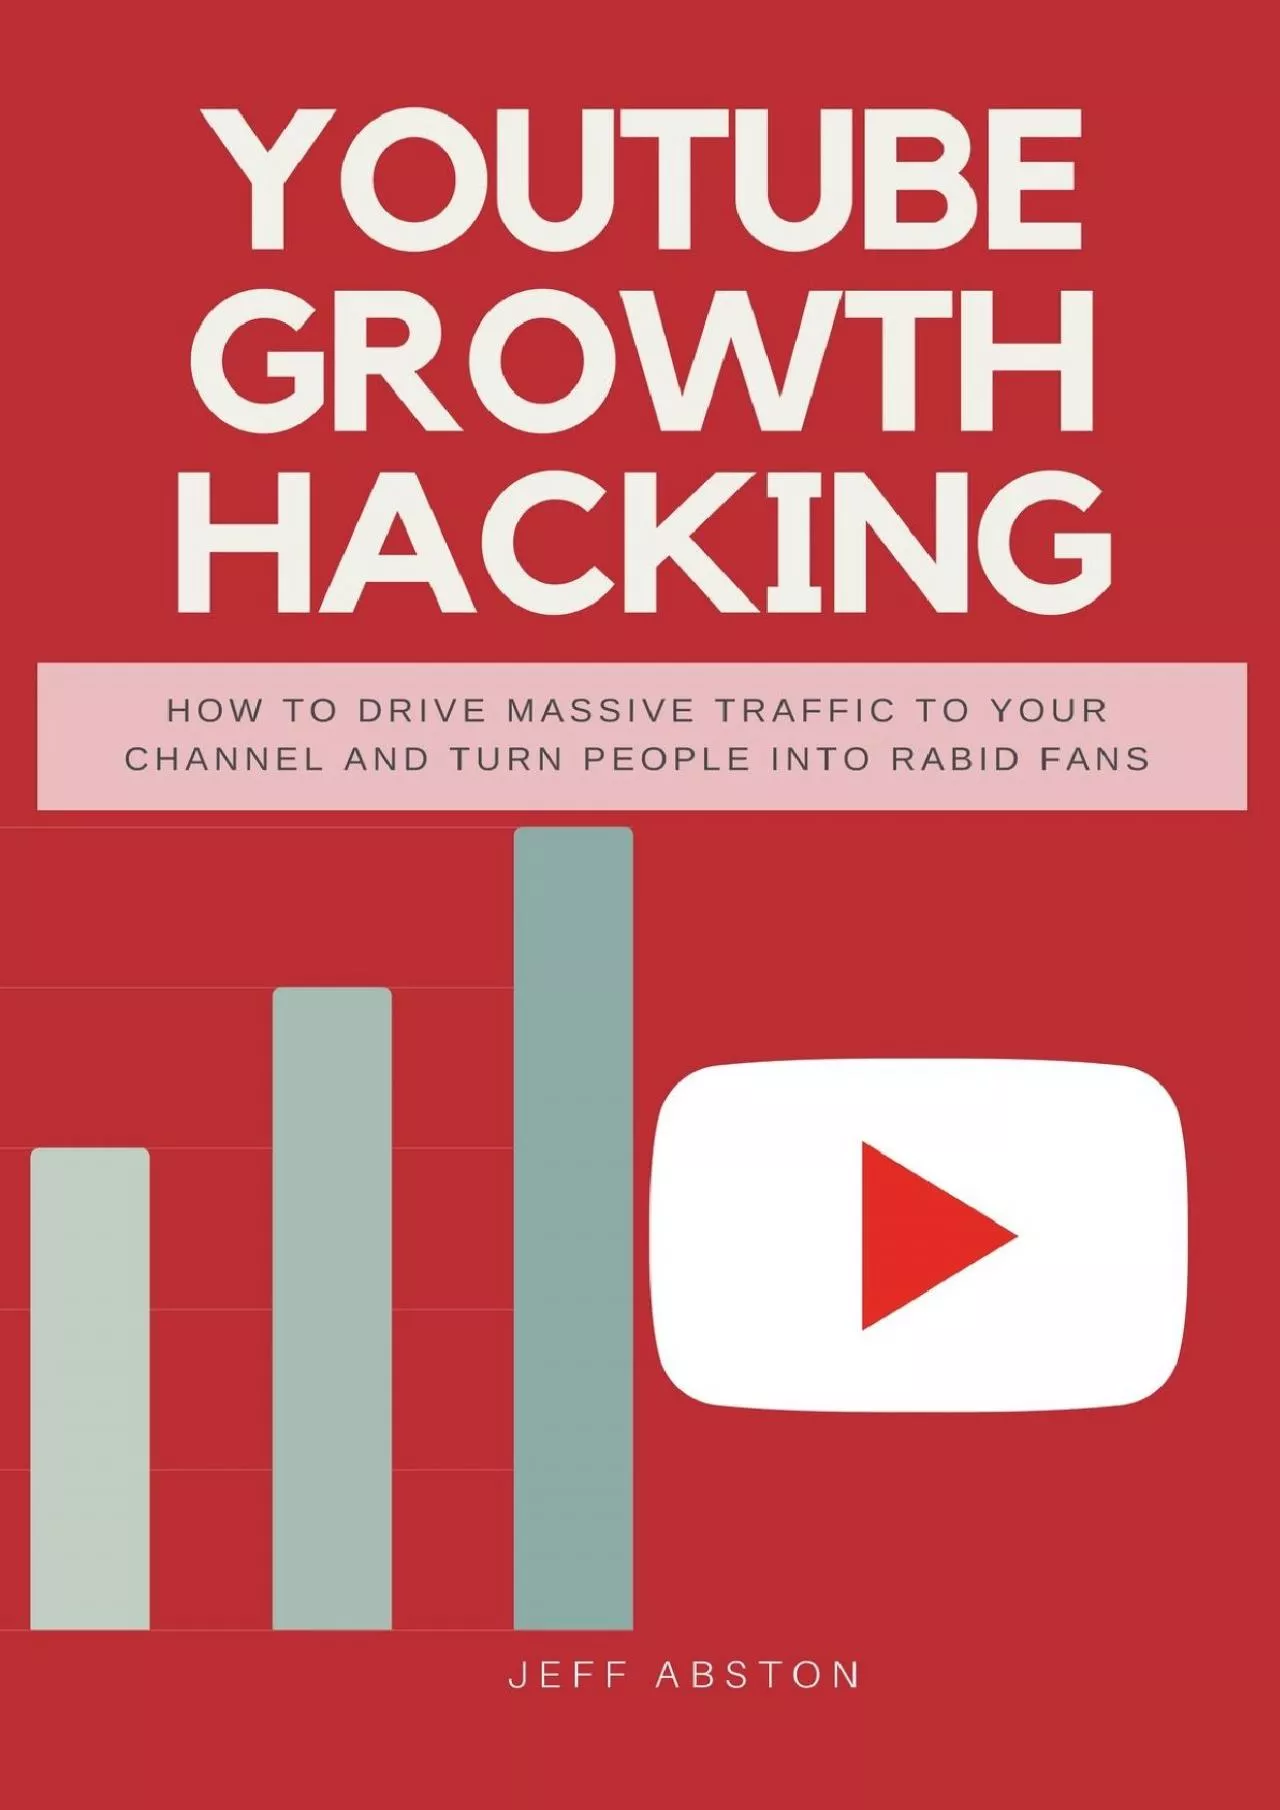 Youtube Growth Hacking: How to Drive Massive Traffic to Your Channel And Turn People Into